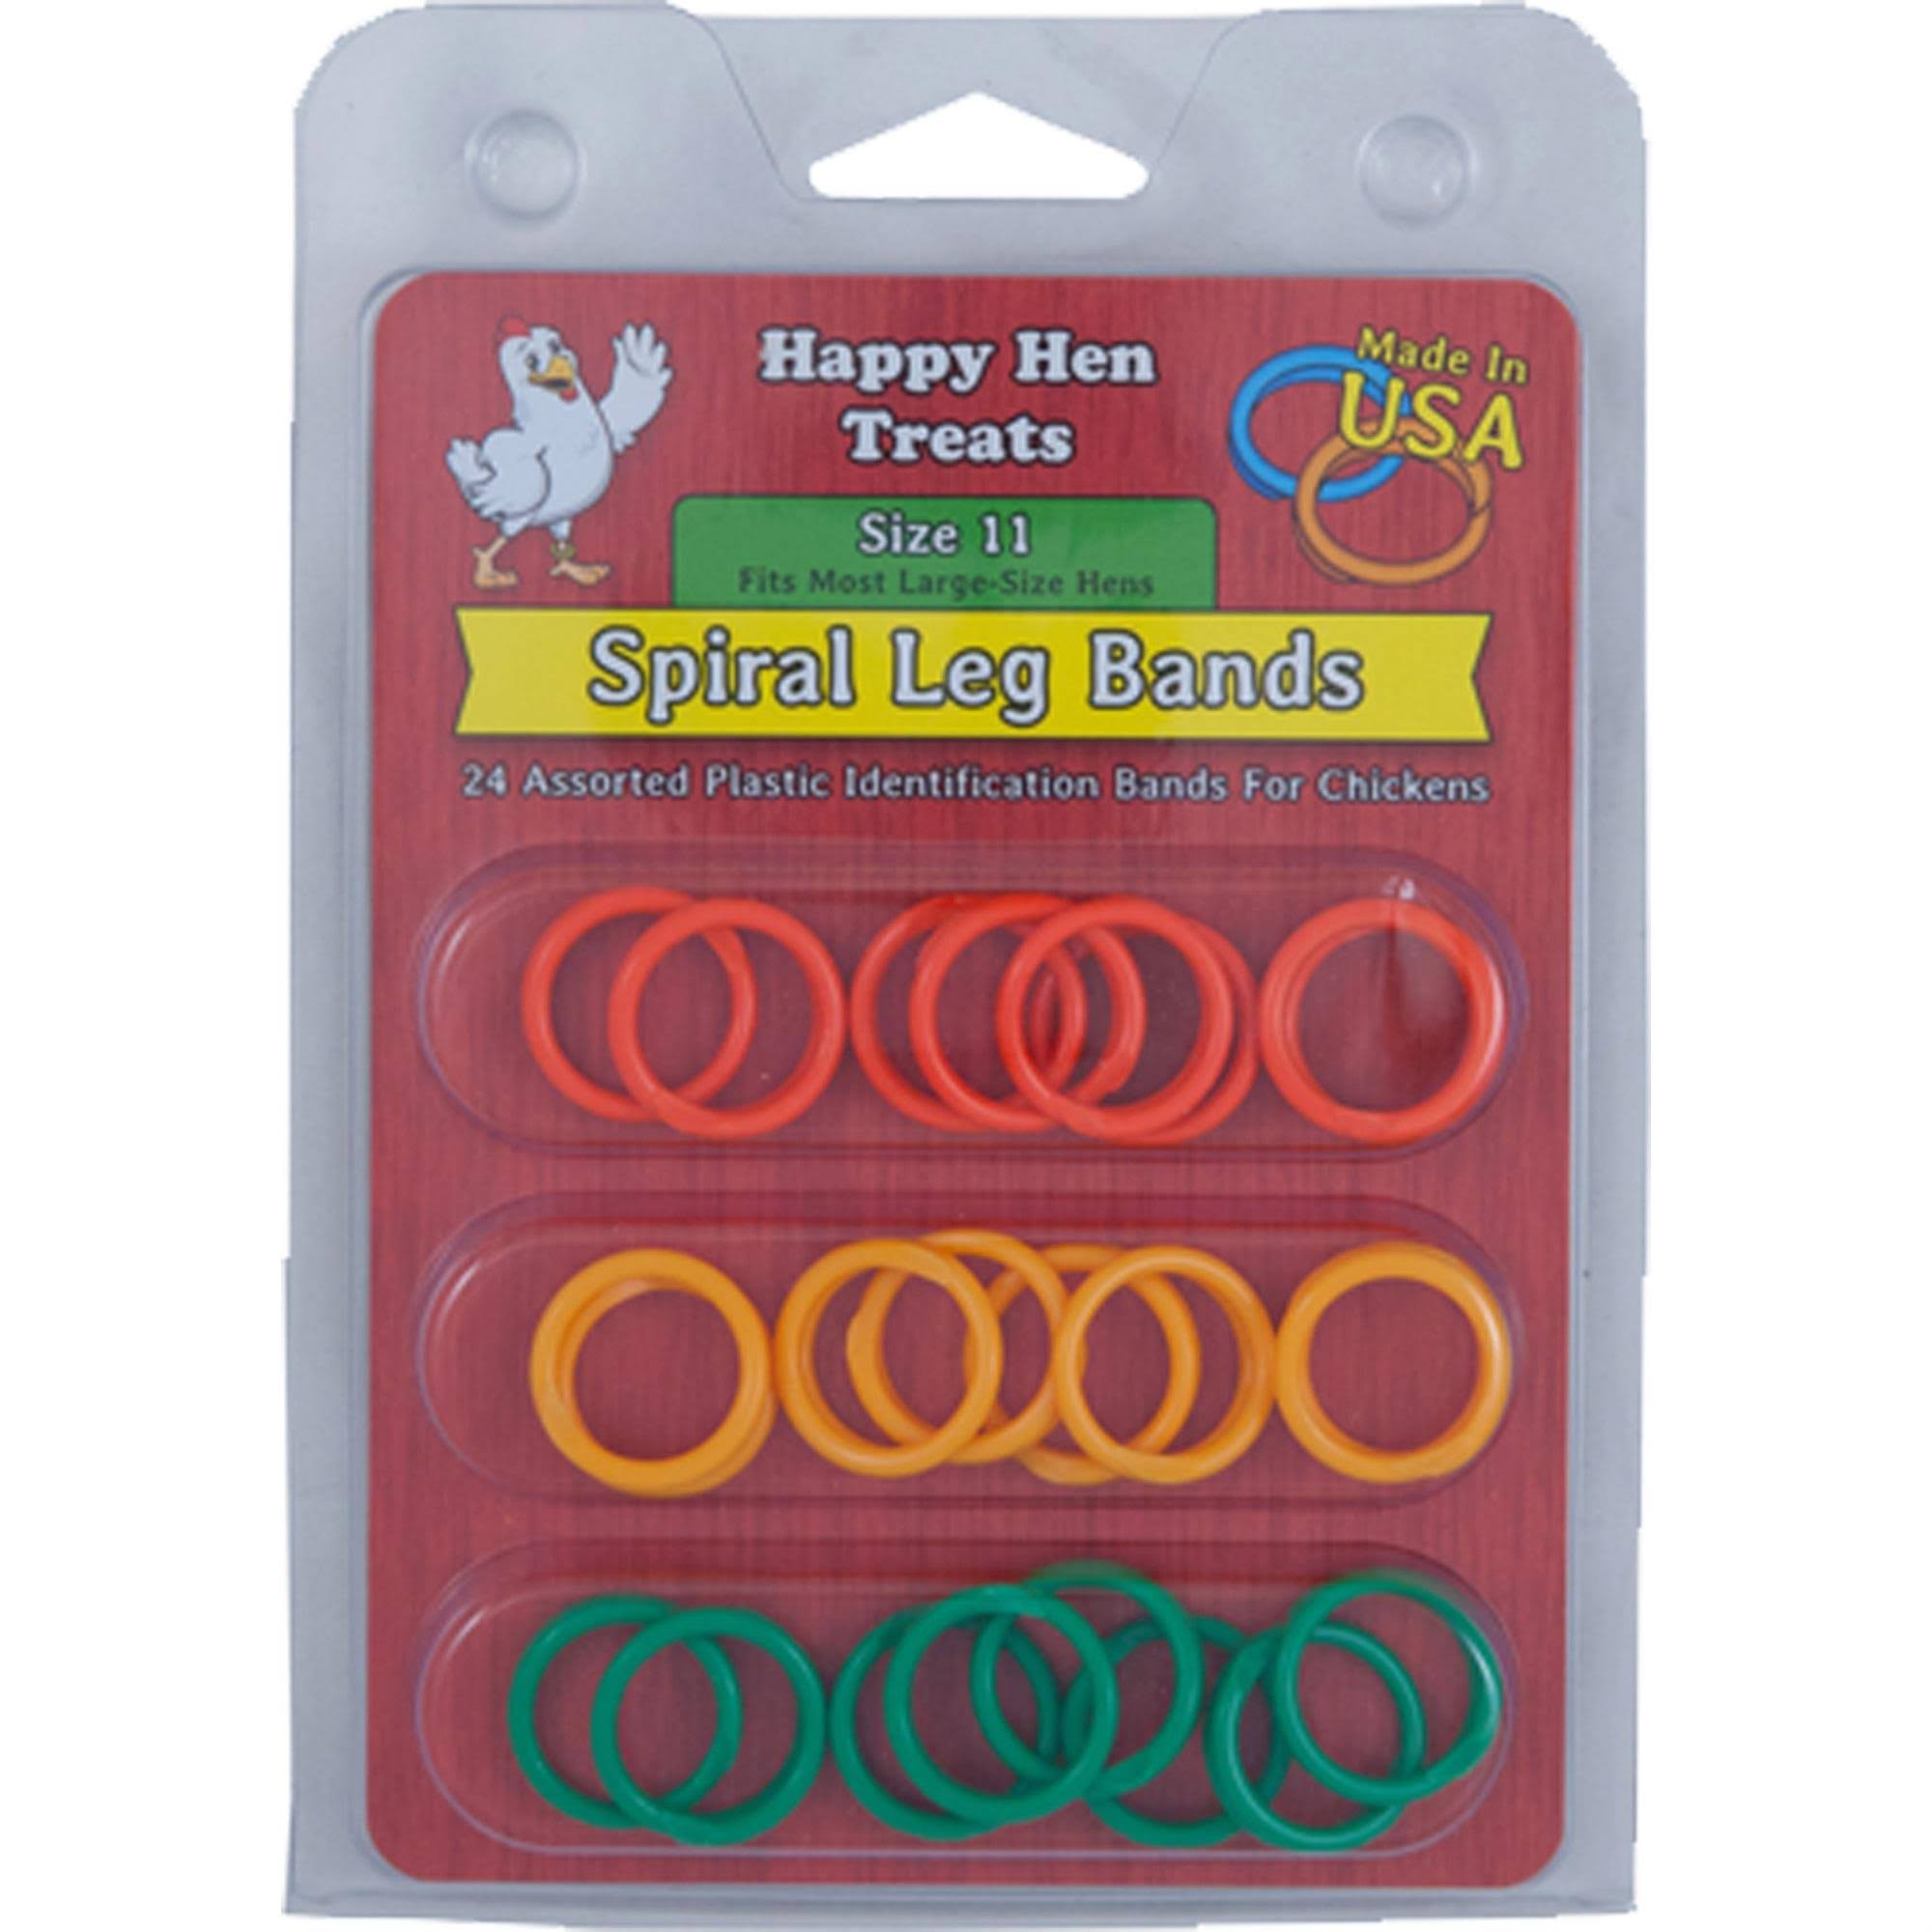 Happy Hen Spiral Leg Bands Use to Identify Age of Your Chickens - 26 Count, Size 11